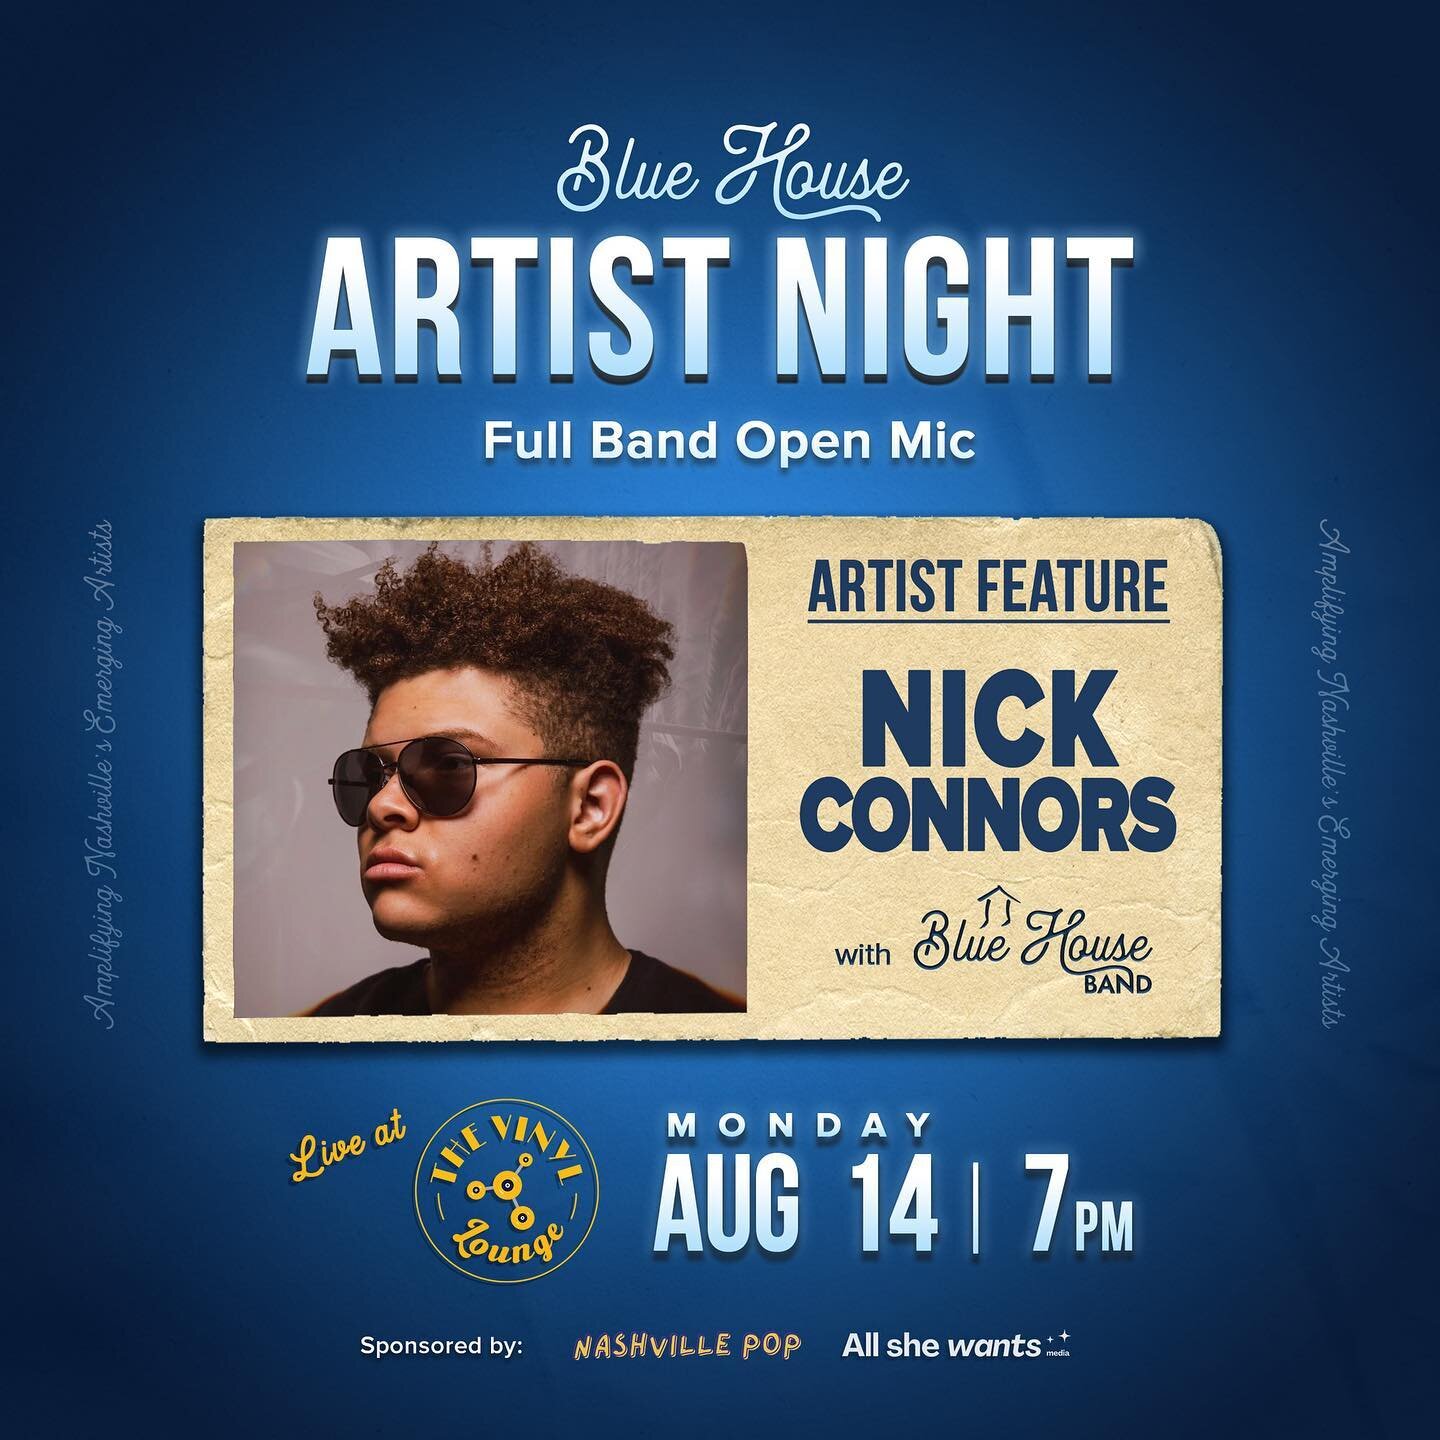 We&rsquo;re so excited to spotlight the incredible vocal talent of @thenickconnors this week at Artist Night! 😆

📝 Artists, this is your chance to feature your own song and be a part of a supportive community of artists. Sign-up with your original 